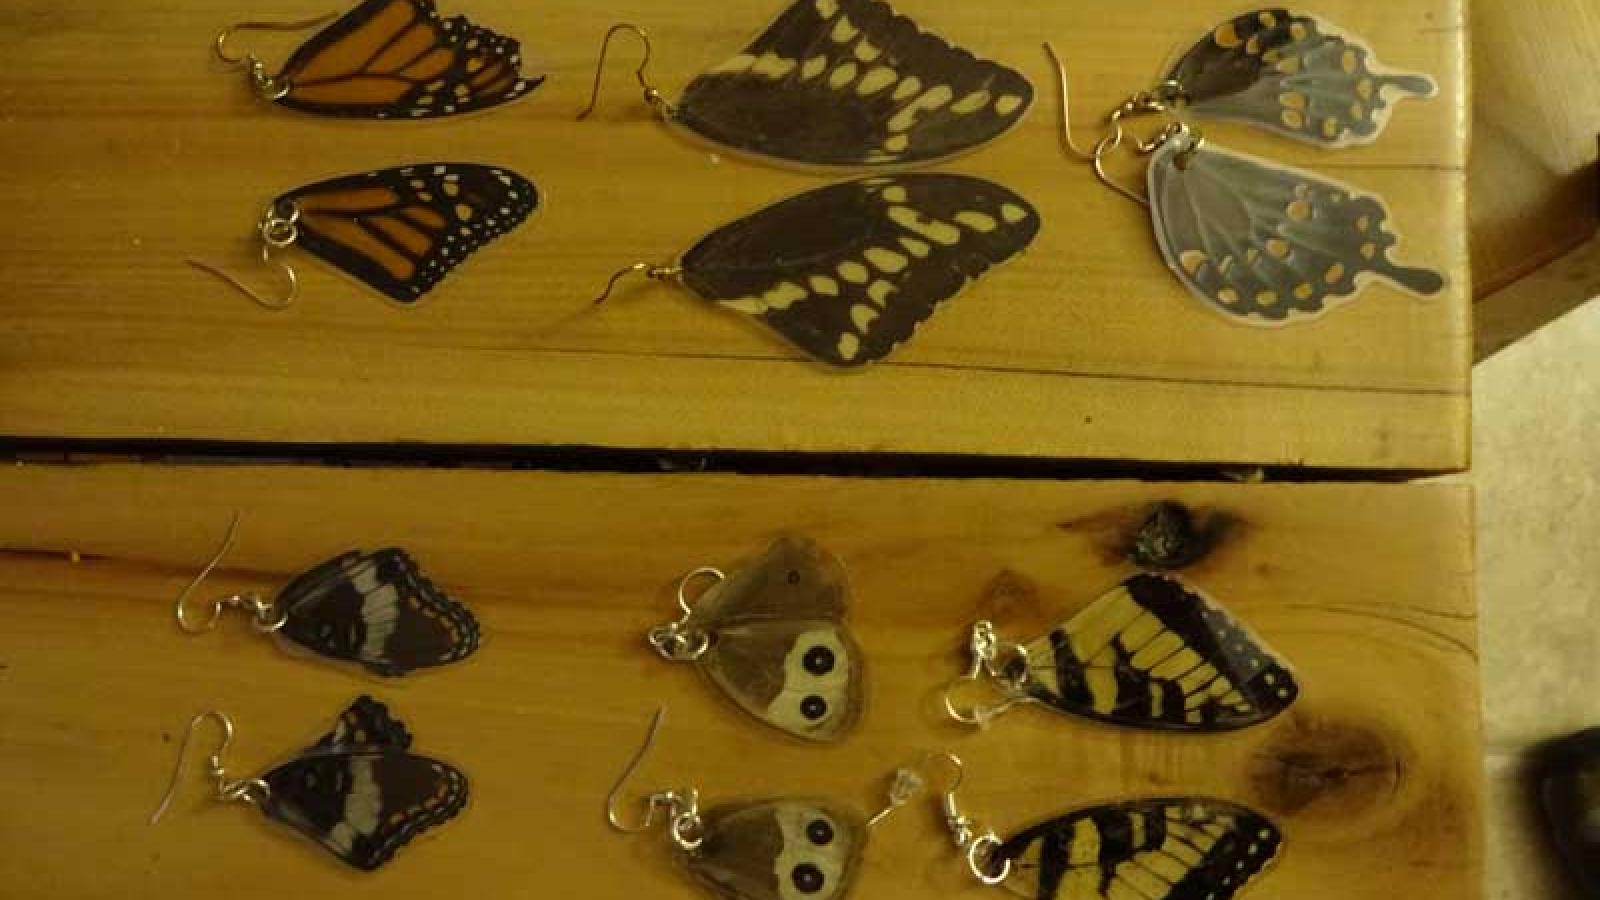 "Earwings" handmade from salvaged butterfly wings by Emily Harper.